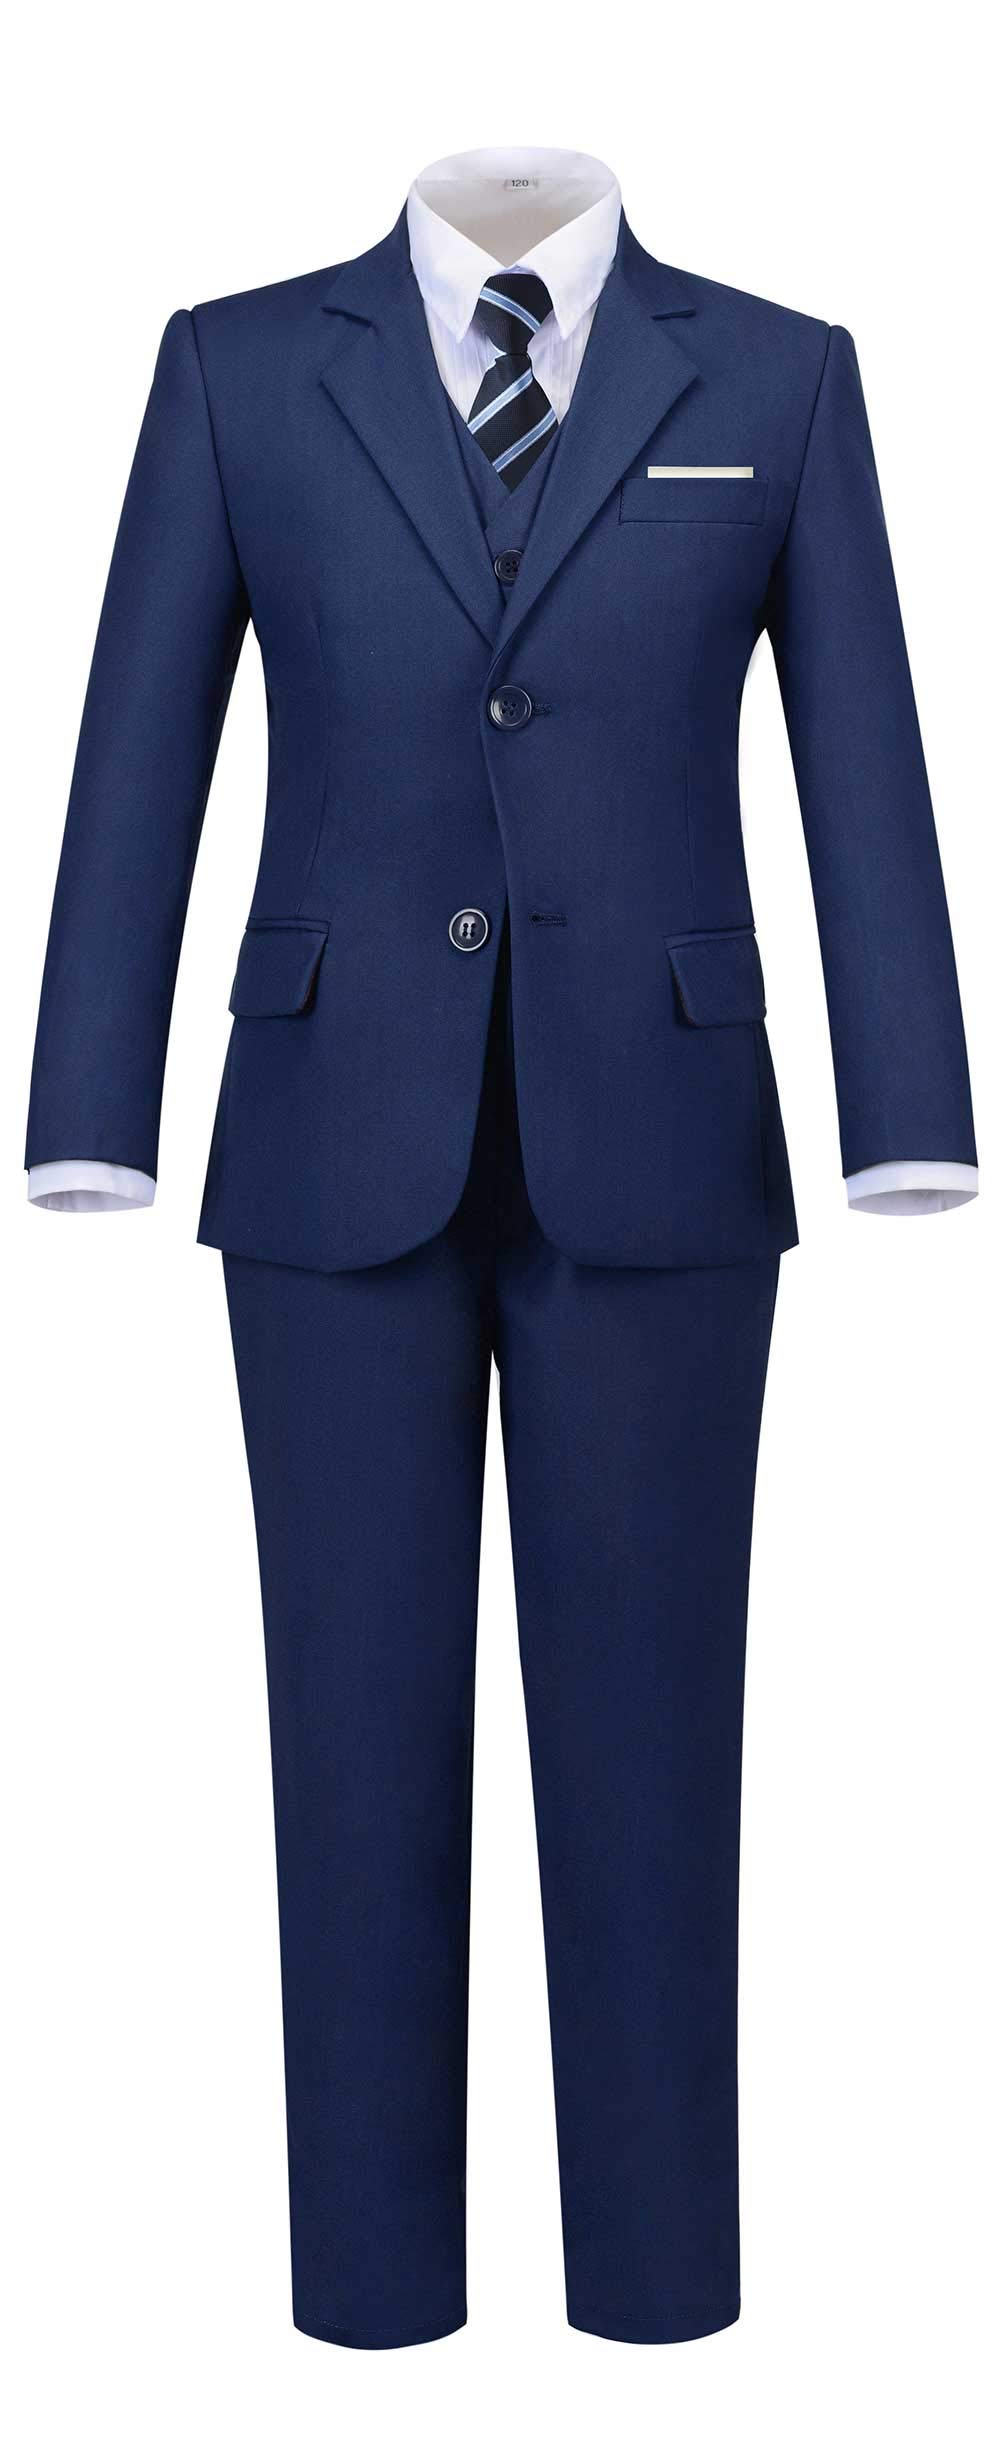 Addneo Suits For Boys Navy Blue Graduation Suits For Kids With White Dress Shirt And Tie Size 5